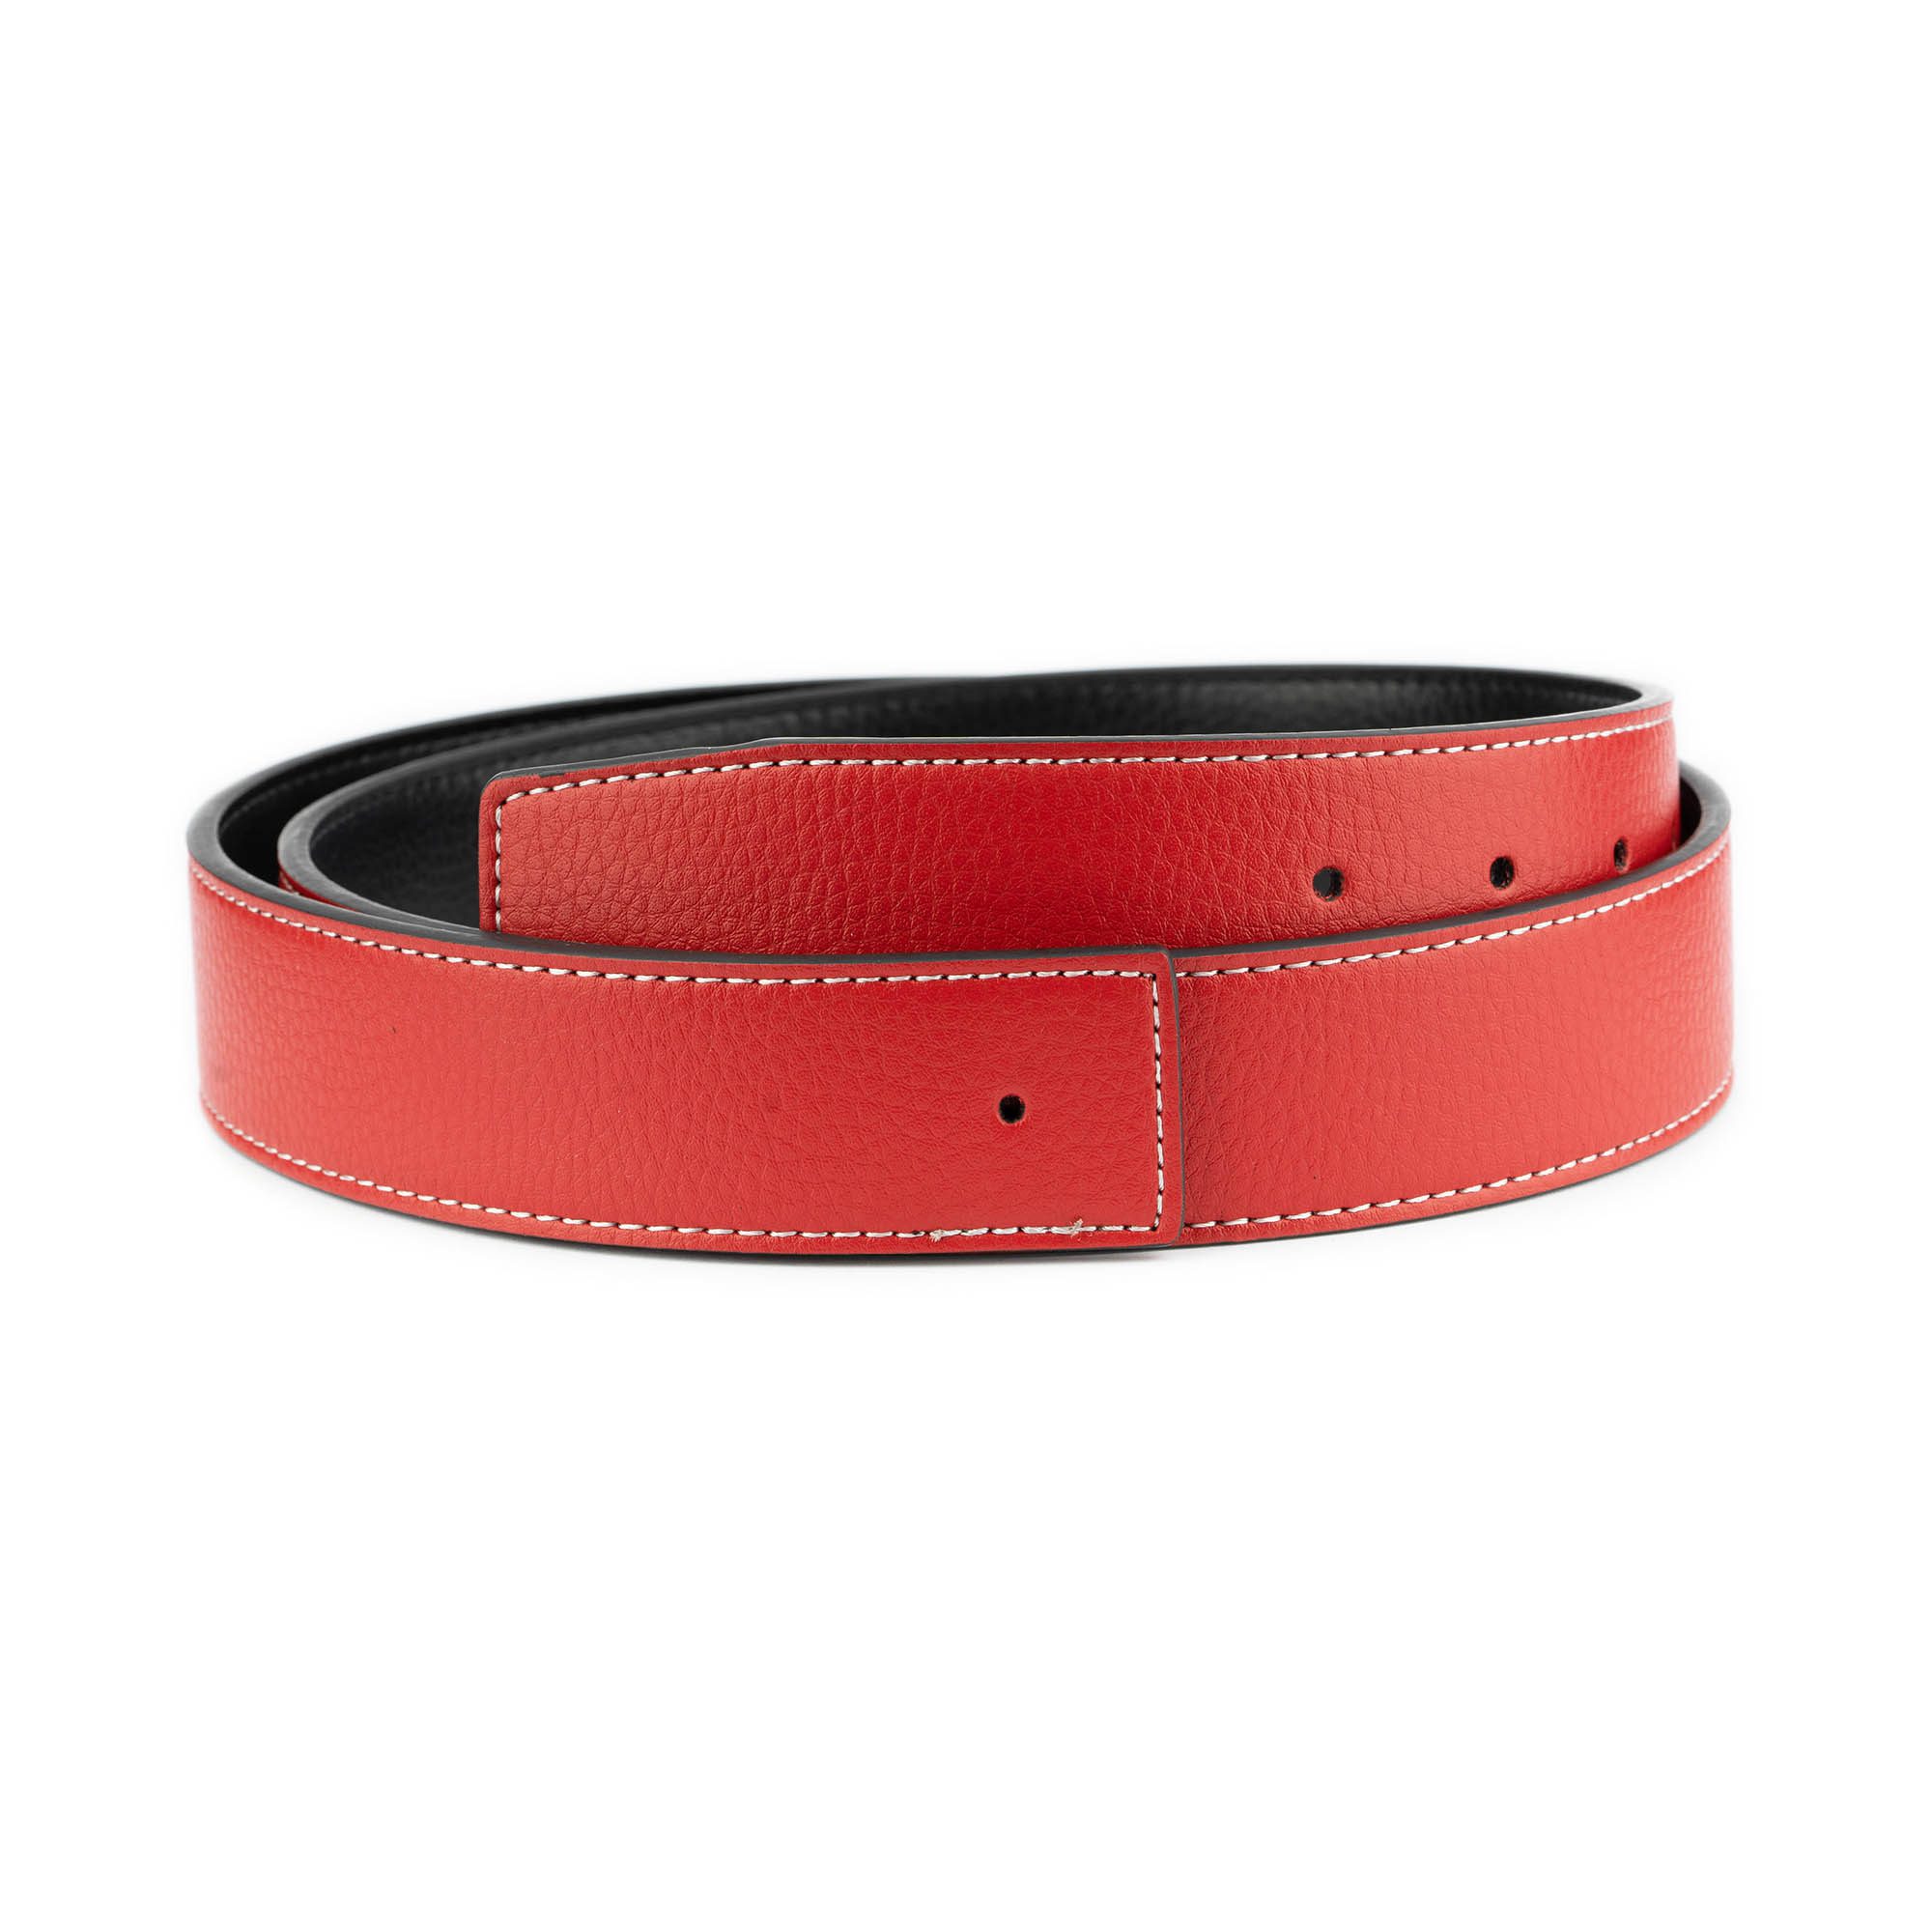 Reversible belt strap 40 mm without buckle